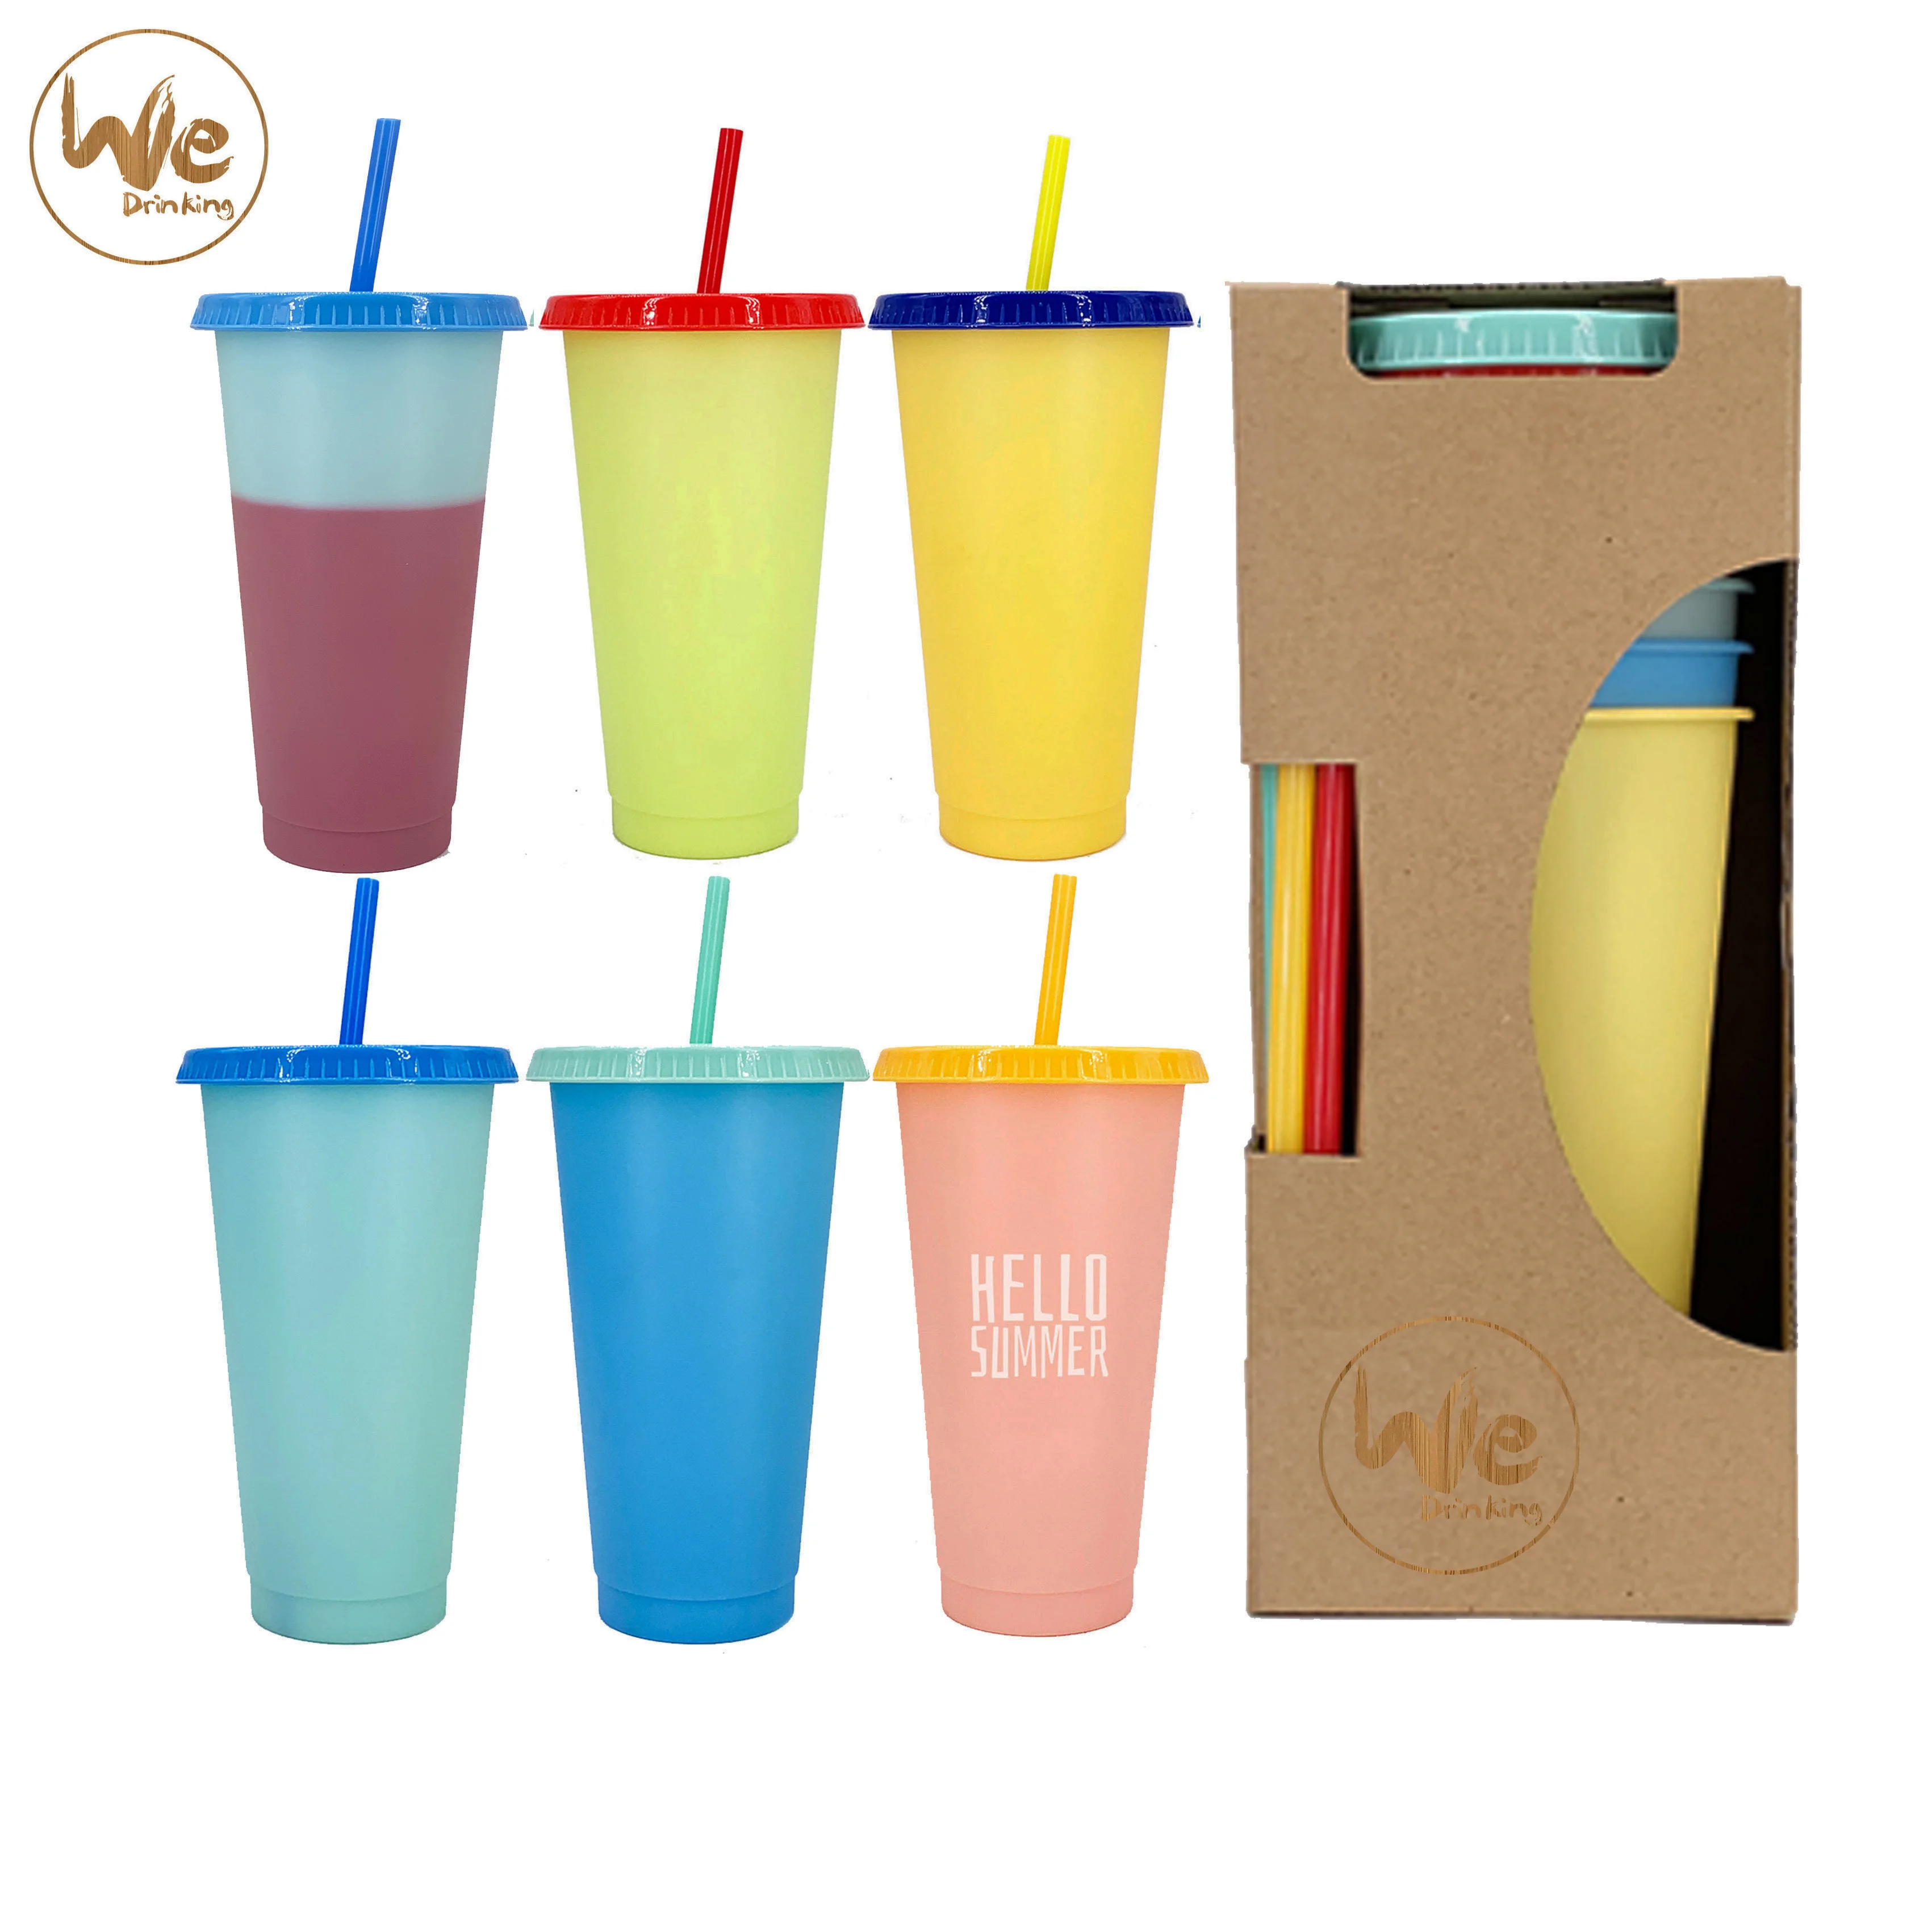 

24OZ 680ml color colour changing reusable cold water coffee cups plastic travel car cups with lids and straws